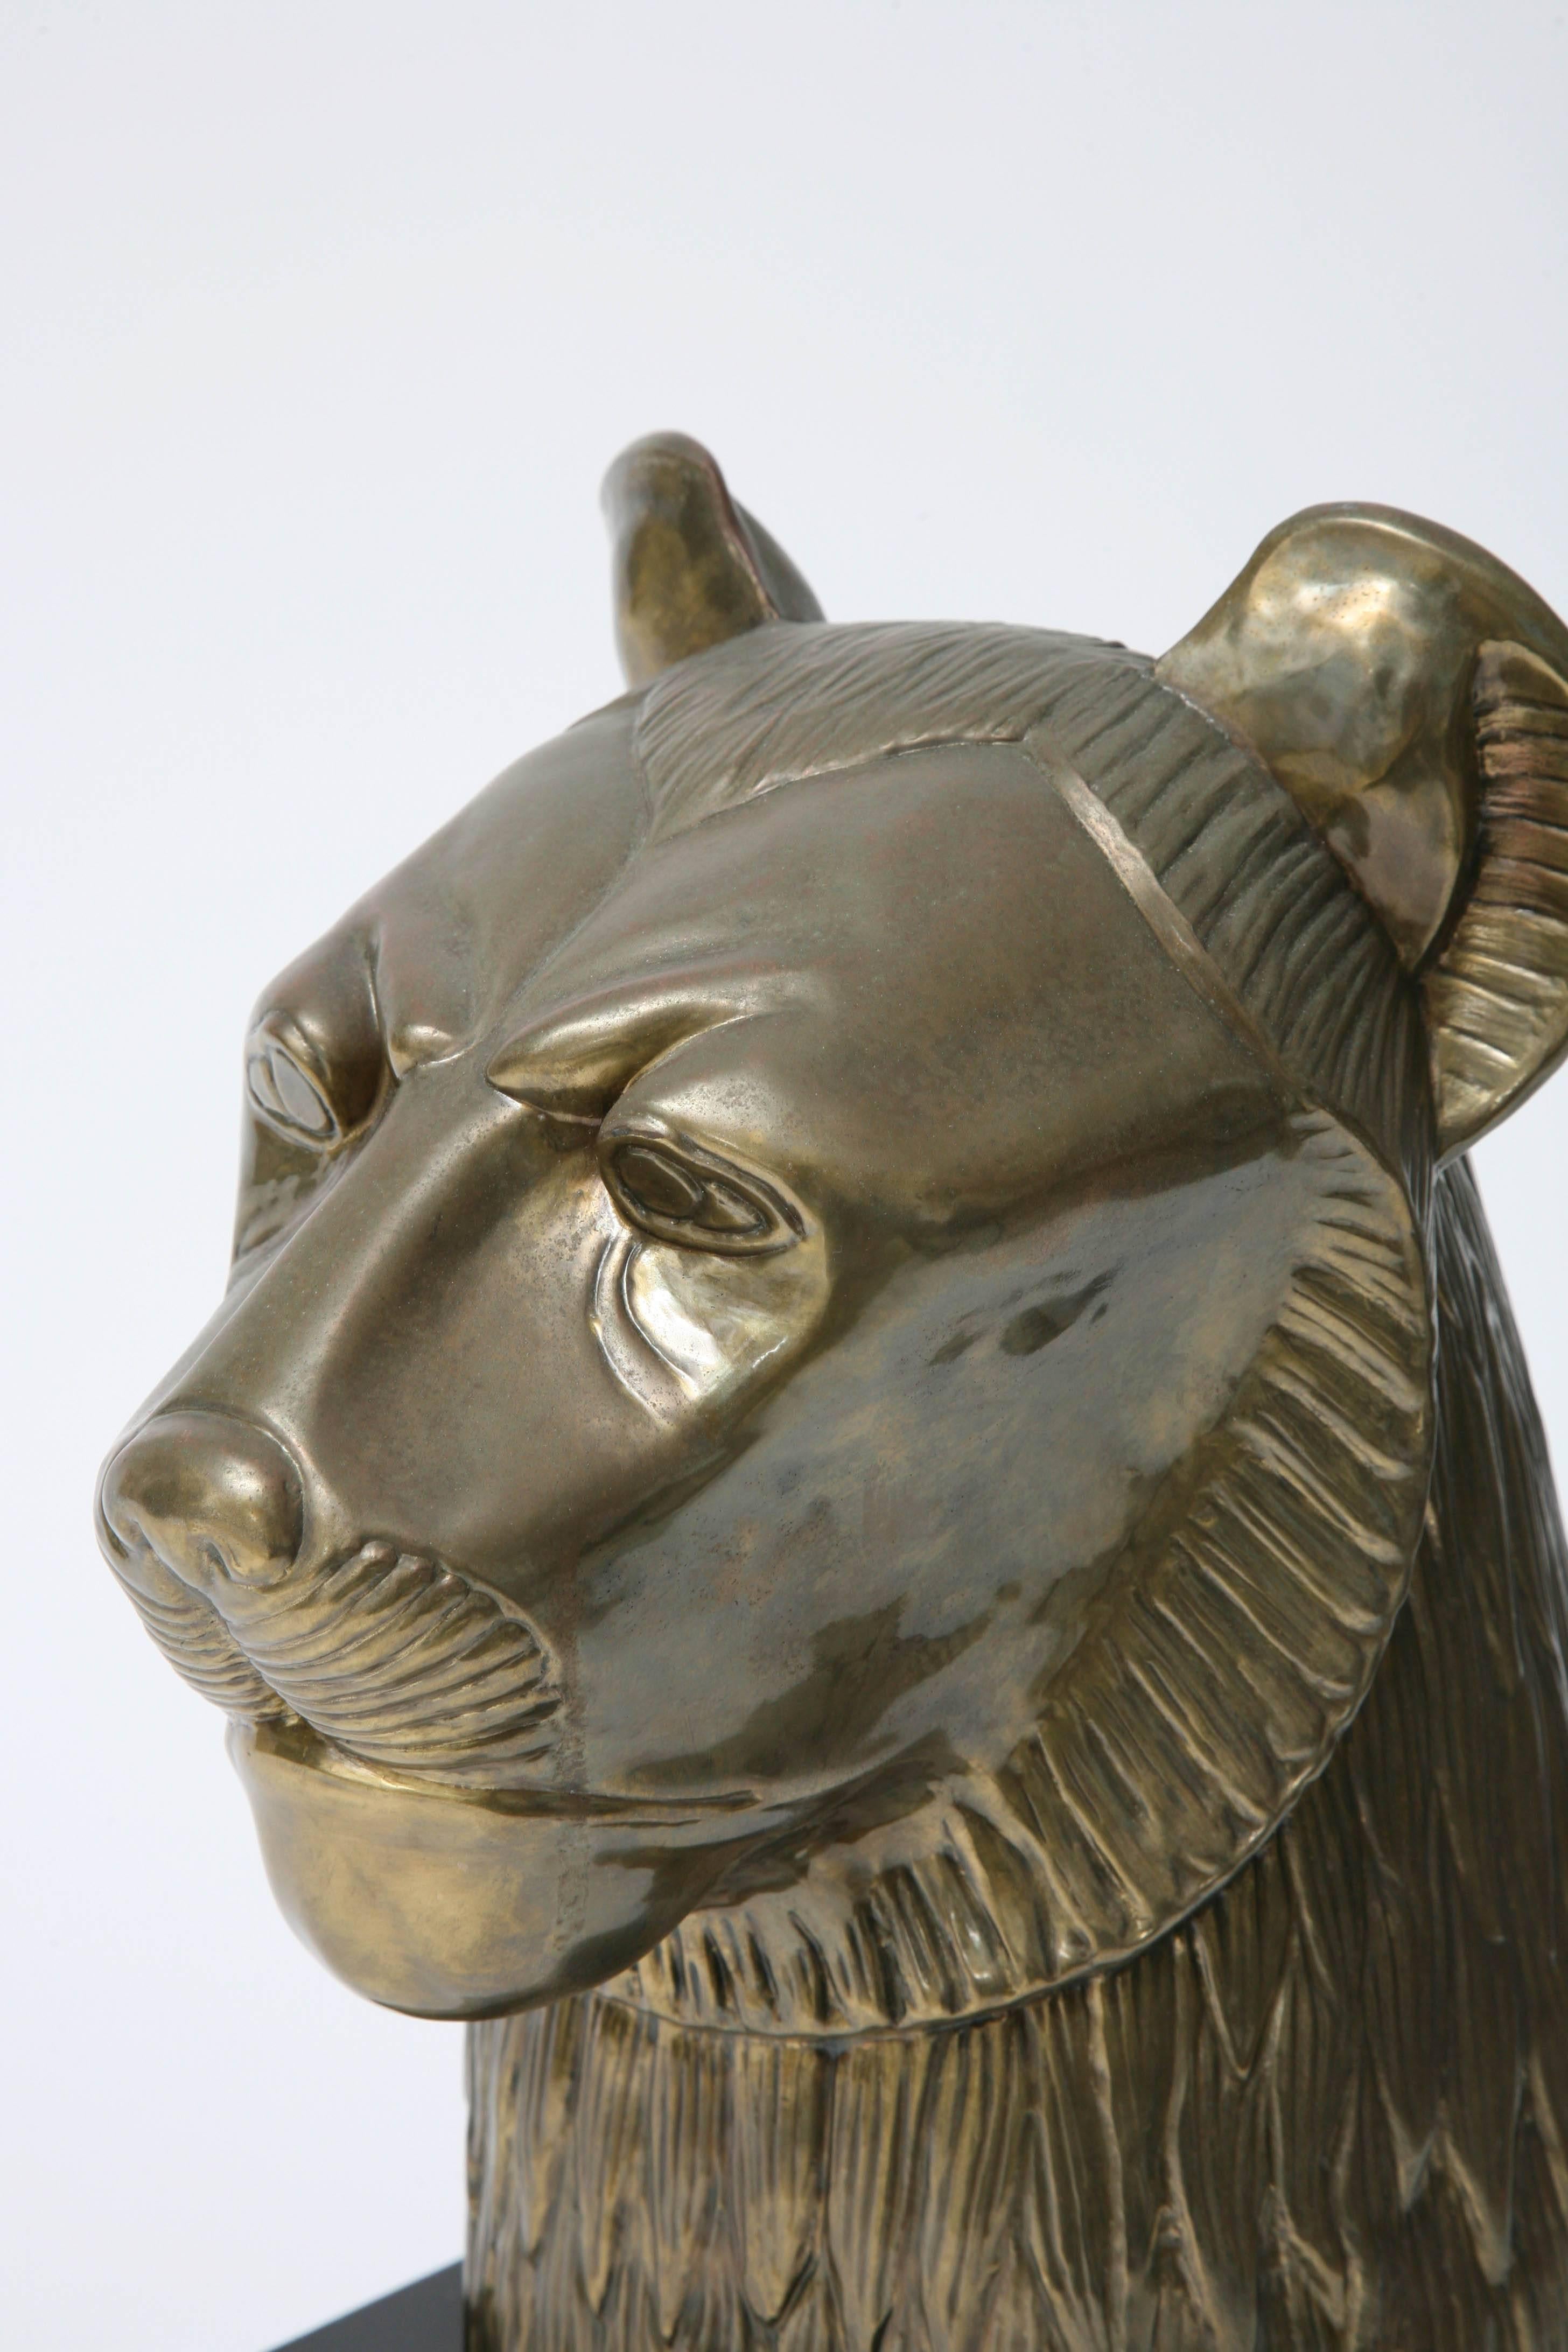 American Egyptian Style, Brass Plated Sculpture by Chapman of the Lioness Goddess Sekhmet